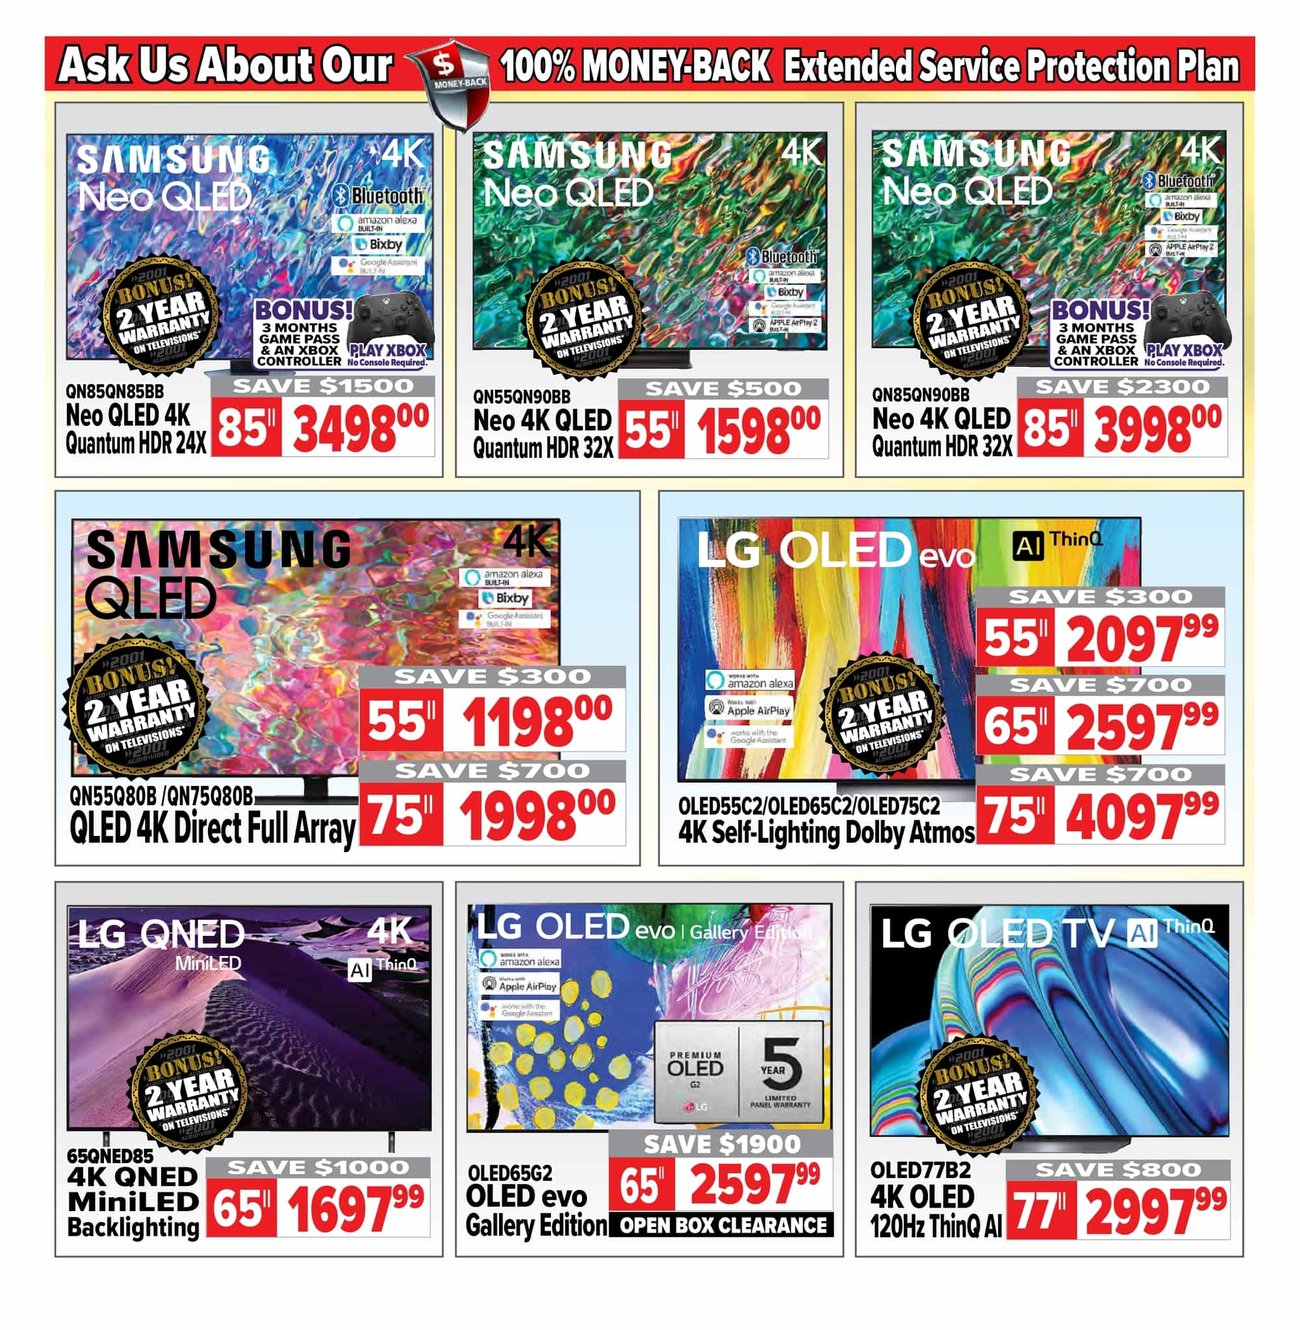 2001 Audio Video - Weekly Flyer Specials - Page 3